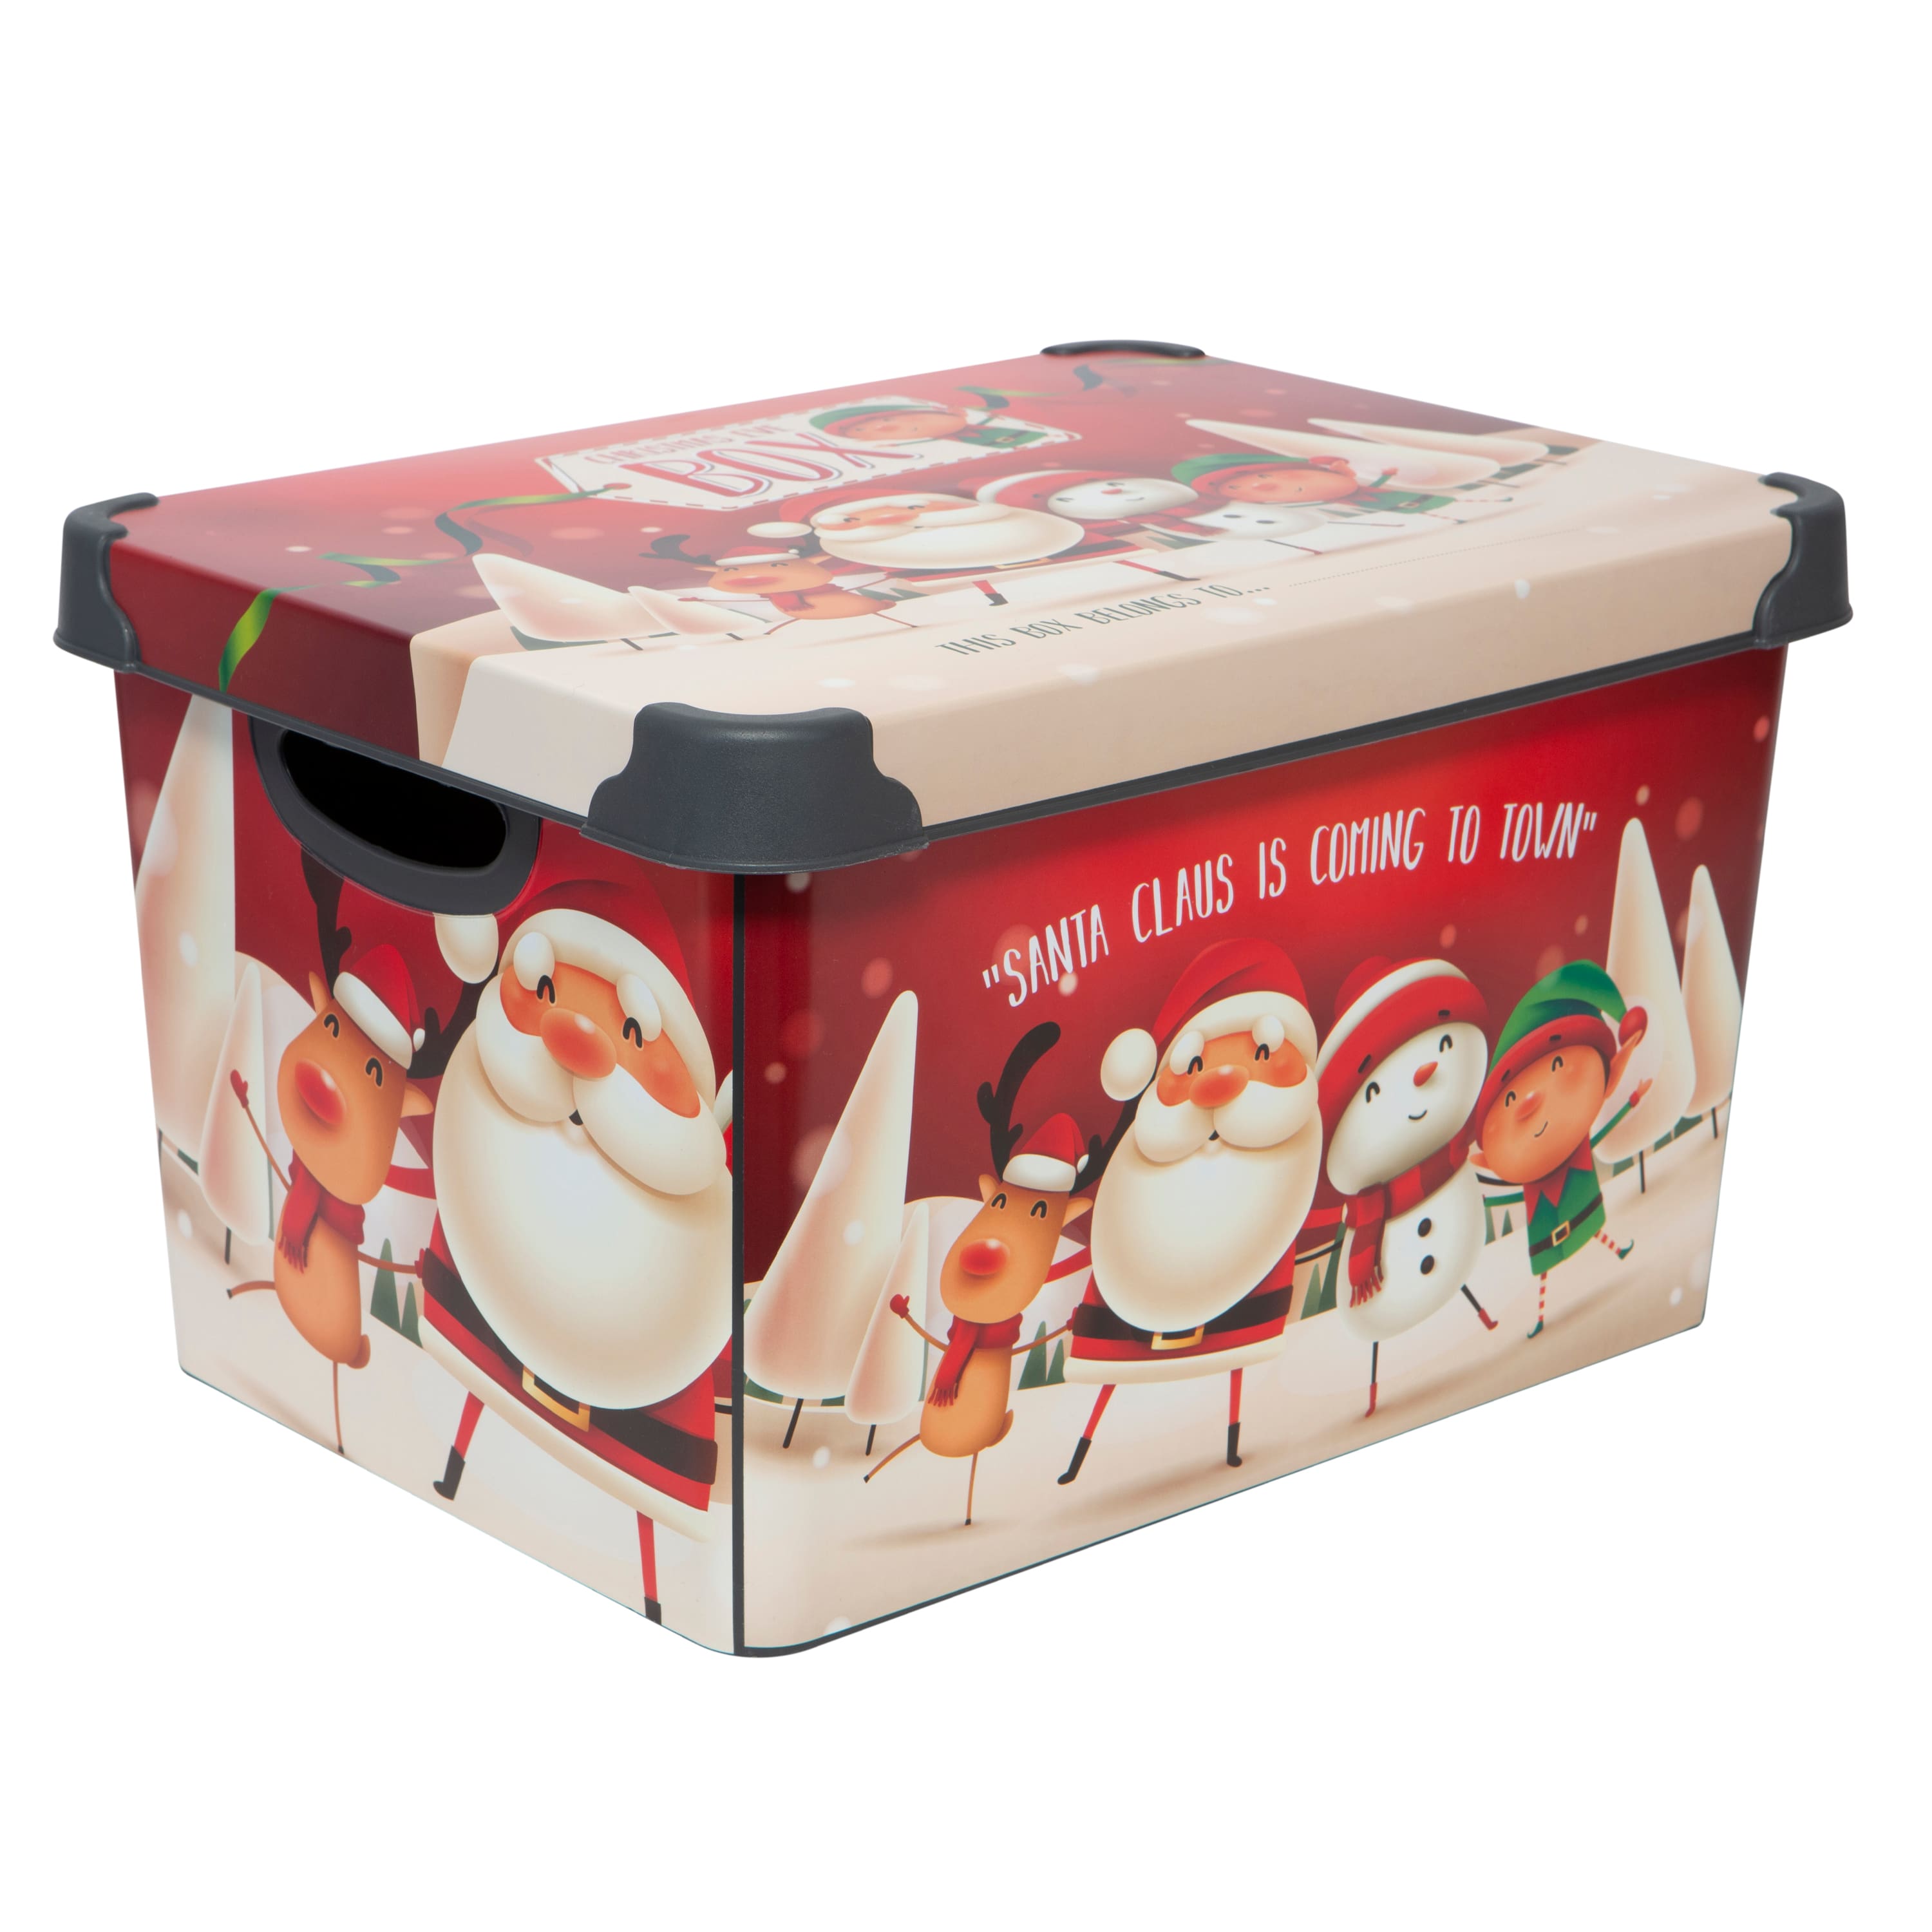 Simplify Santa Clause is Coming to Town Storage Tote Bin